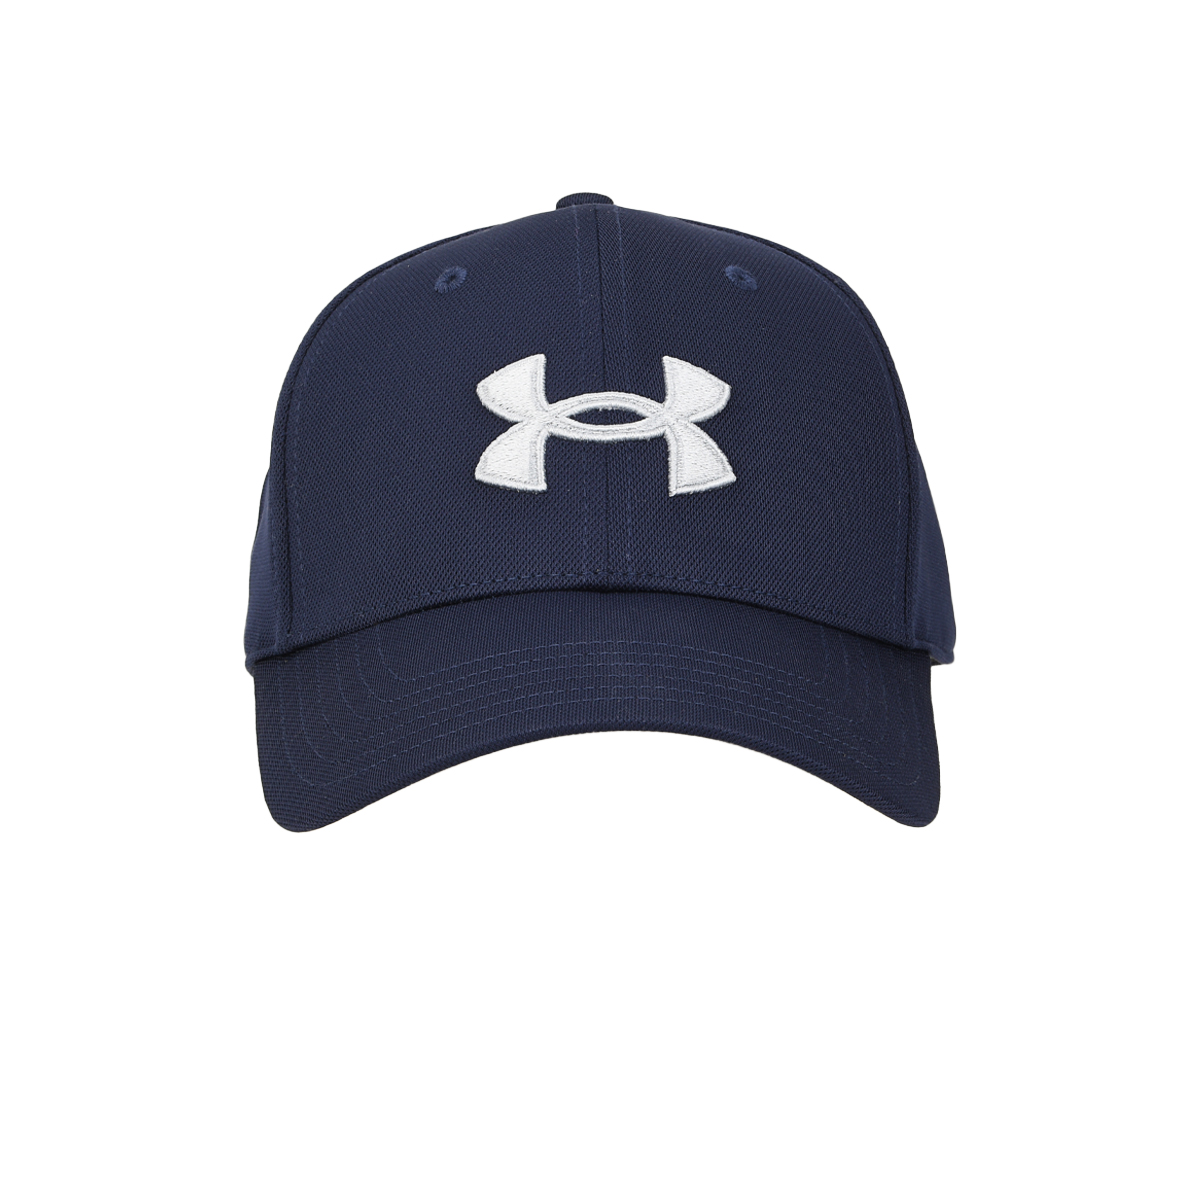 Gorra Entrenamiento Under Armour Blitzing,  image number null